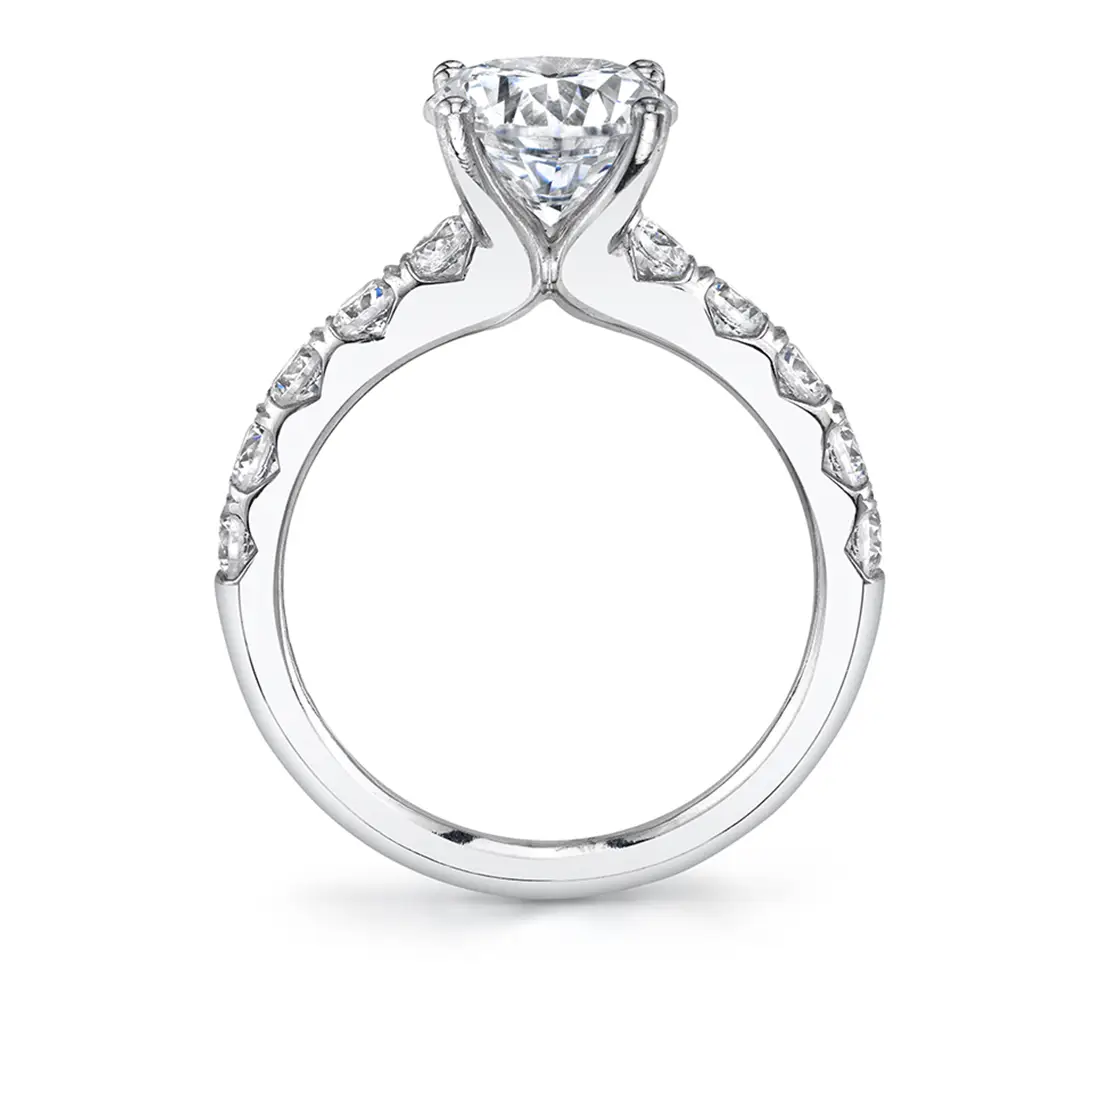 Profile image of a engagement ring with wide band - Aloria